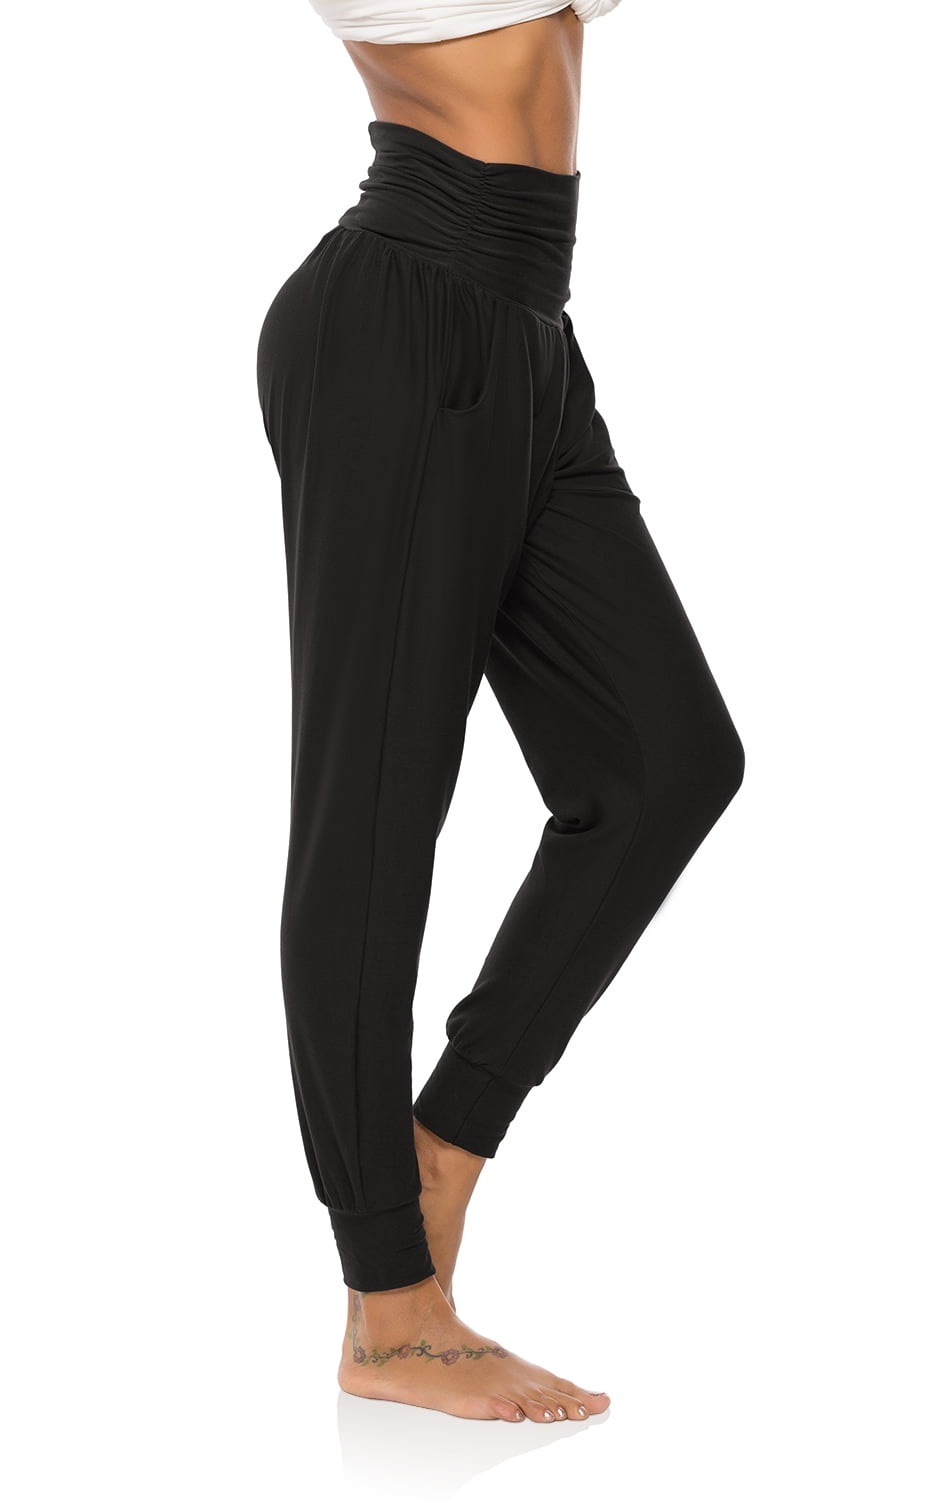 Hessimy Womens Active Yoga Sweatpants Workout Joggers Pants Sweat Pants with Pockets 